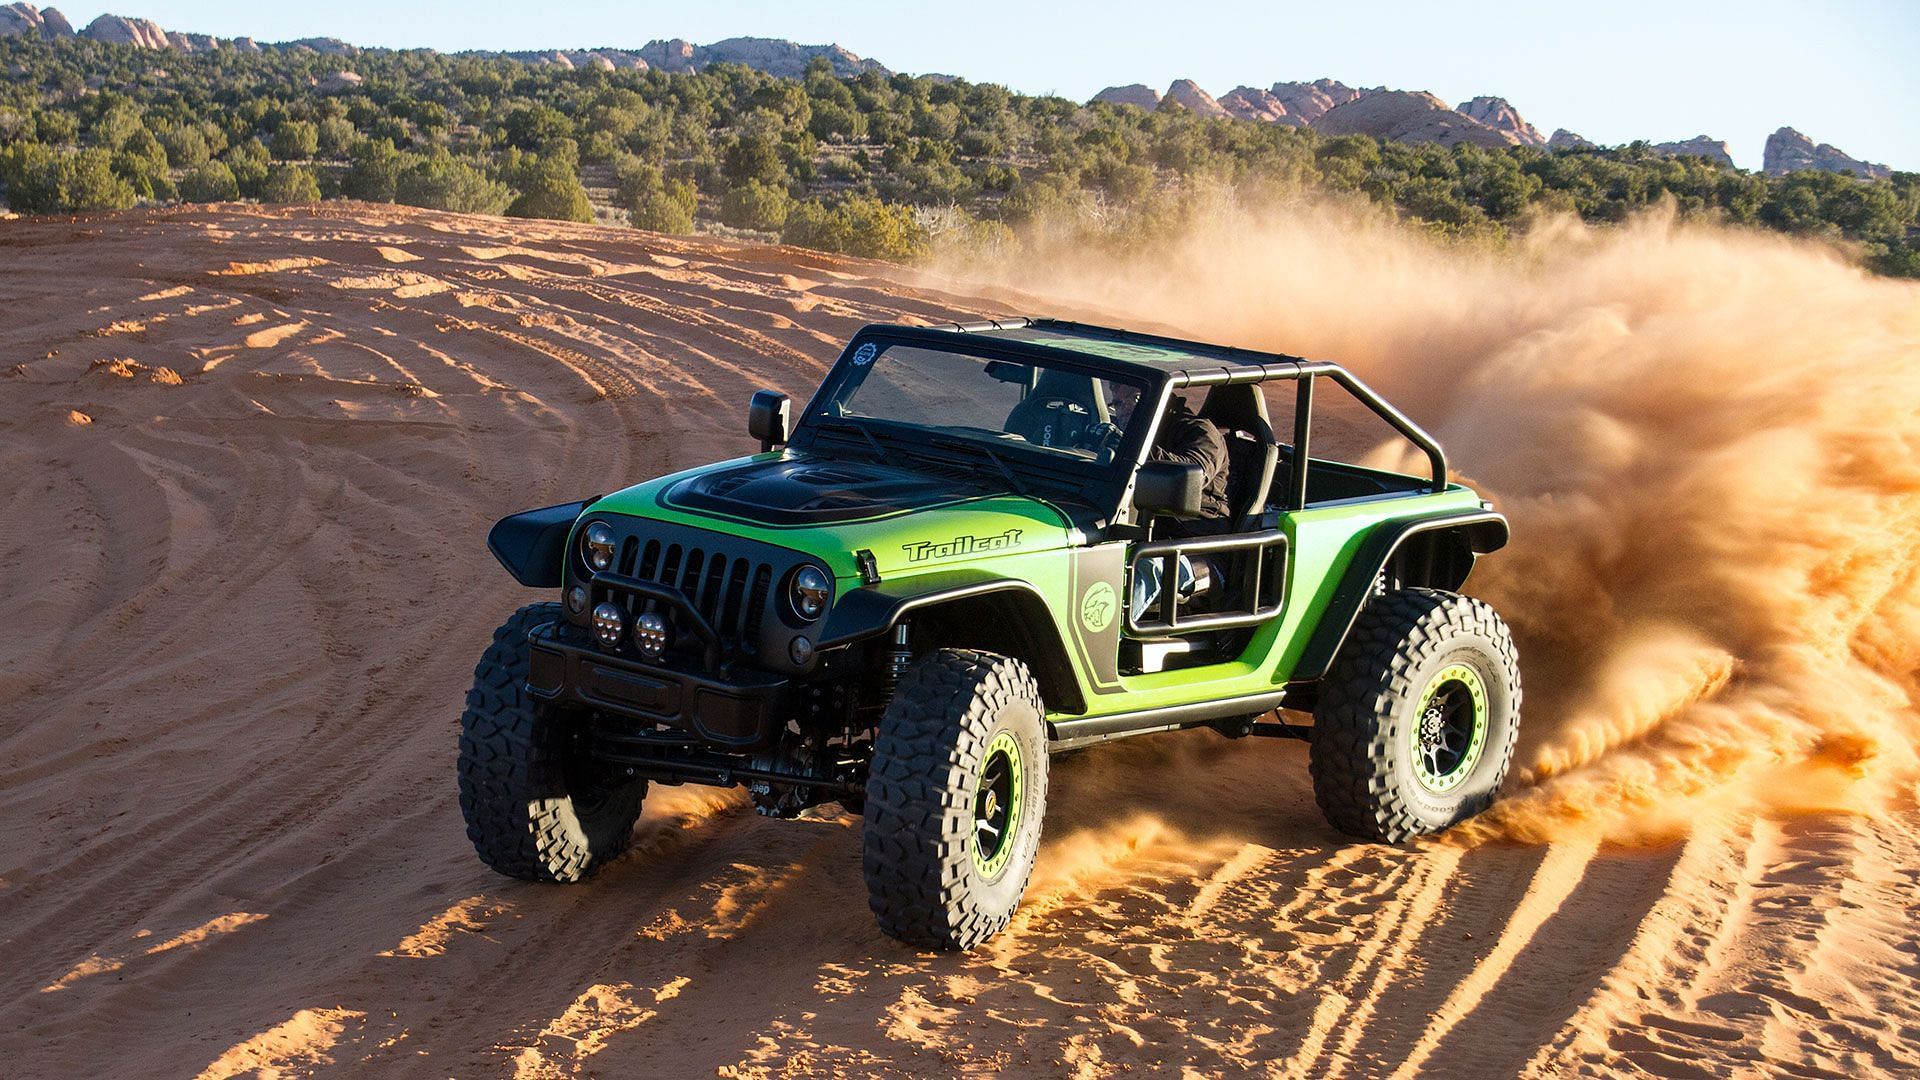 It is built on the Wrangler&#039;s expanded chassis (Image via The Drive)